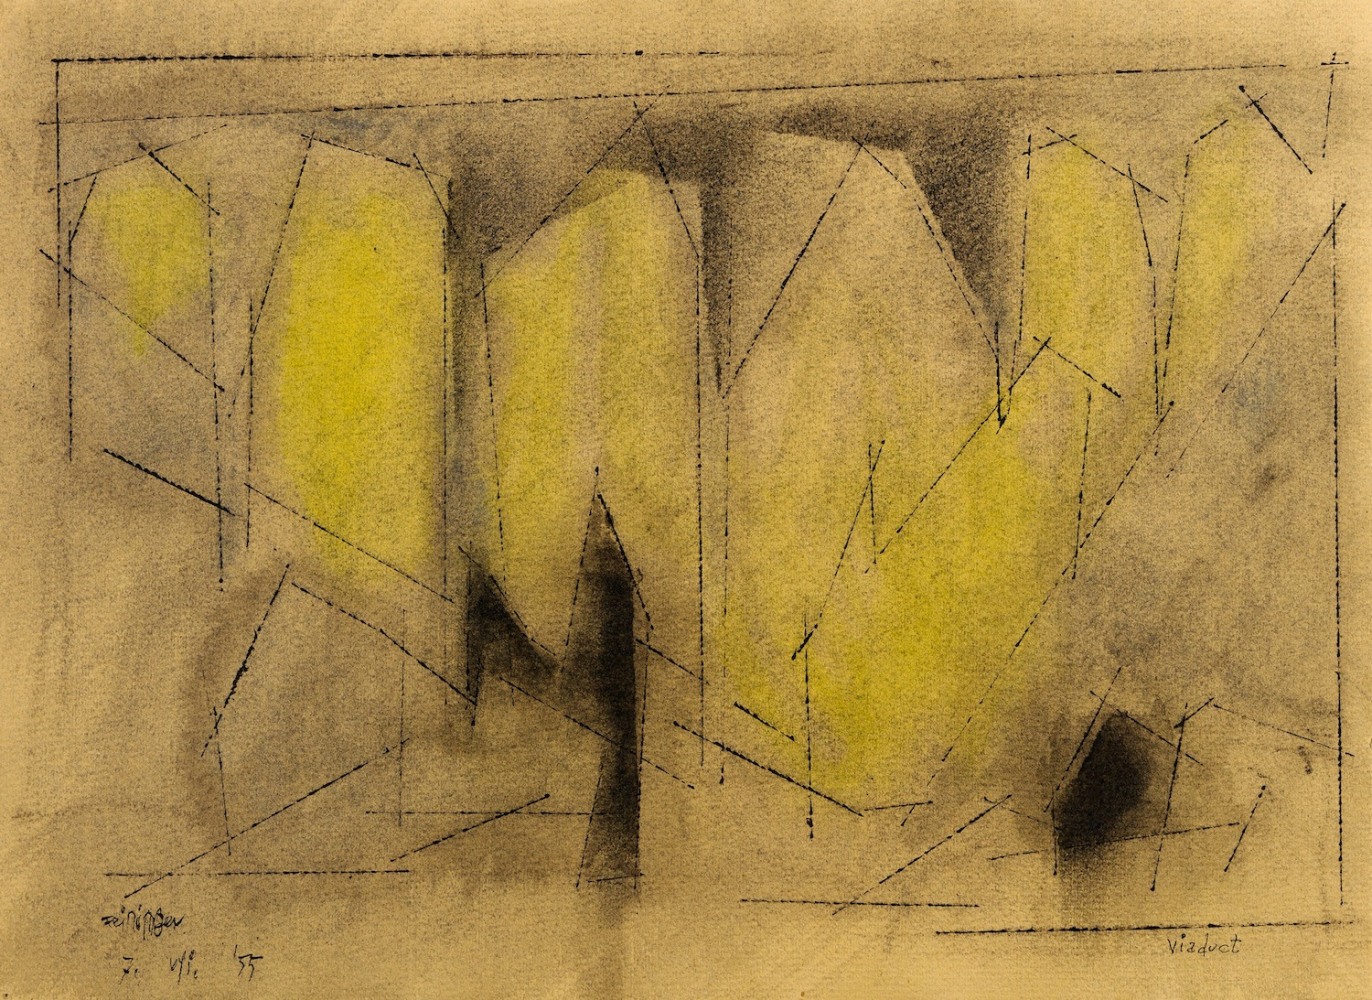 Lyonel Feininger (1871&amp;ndash;1956)

Viaduct, 1955
Watercolor and ink on paper
9 3/8 x 12 1/2 in. (23.8 x 31.8 cm)
Signed and dated lower left:&amp;nbsp;Feininger 7. VII. &amp;lsquo;55&amp;nbsp;

Titled lower right:&amp;nbsp;Viaduct